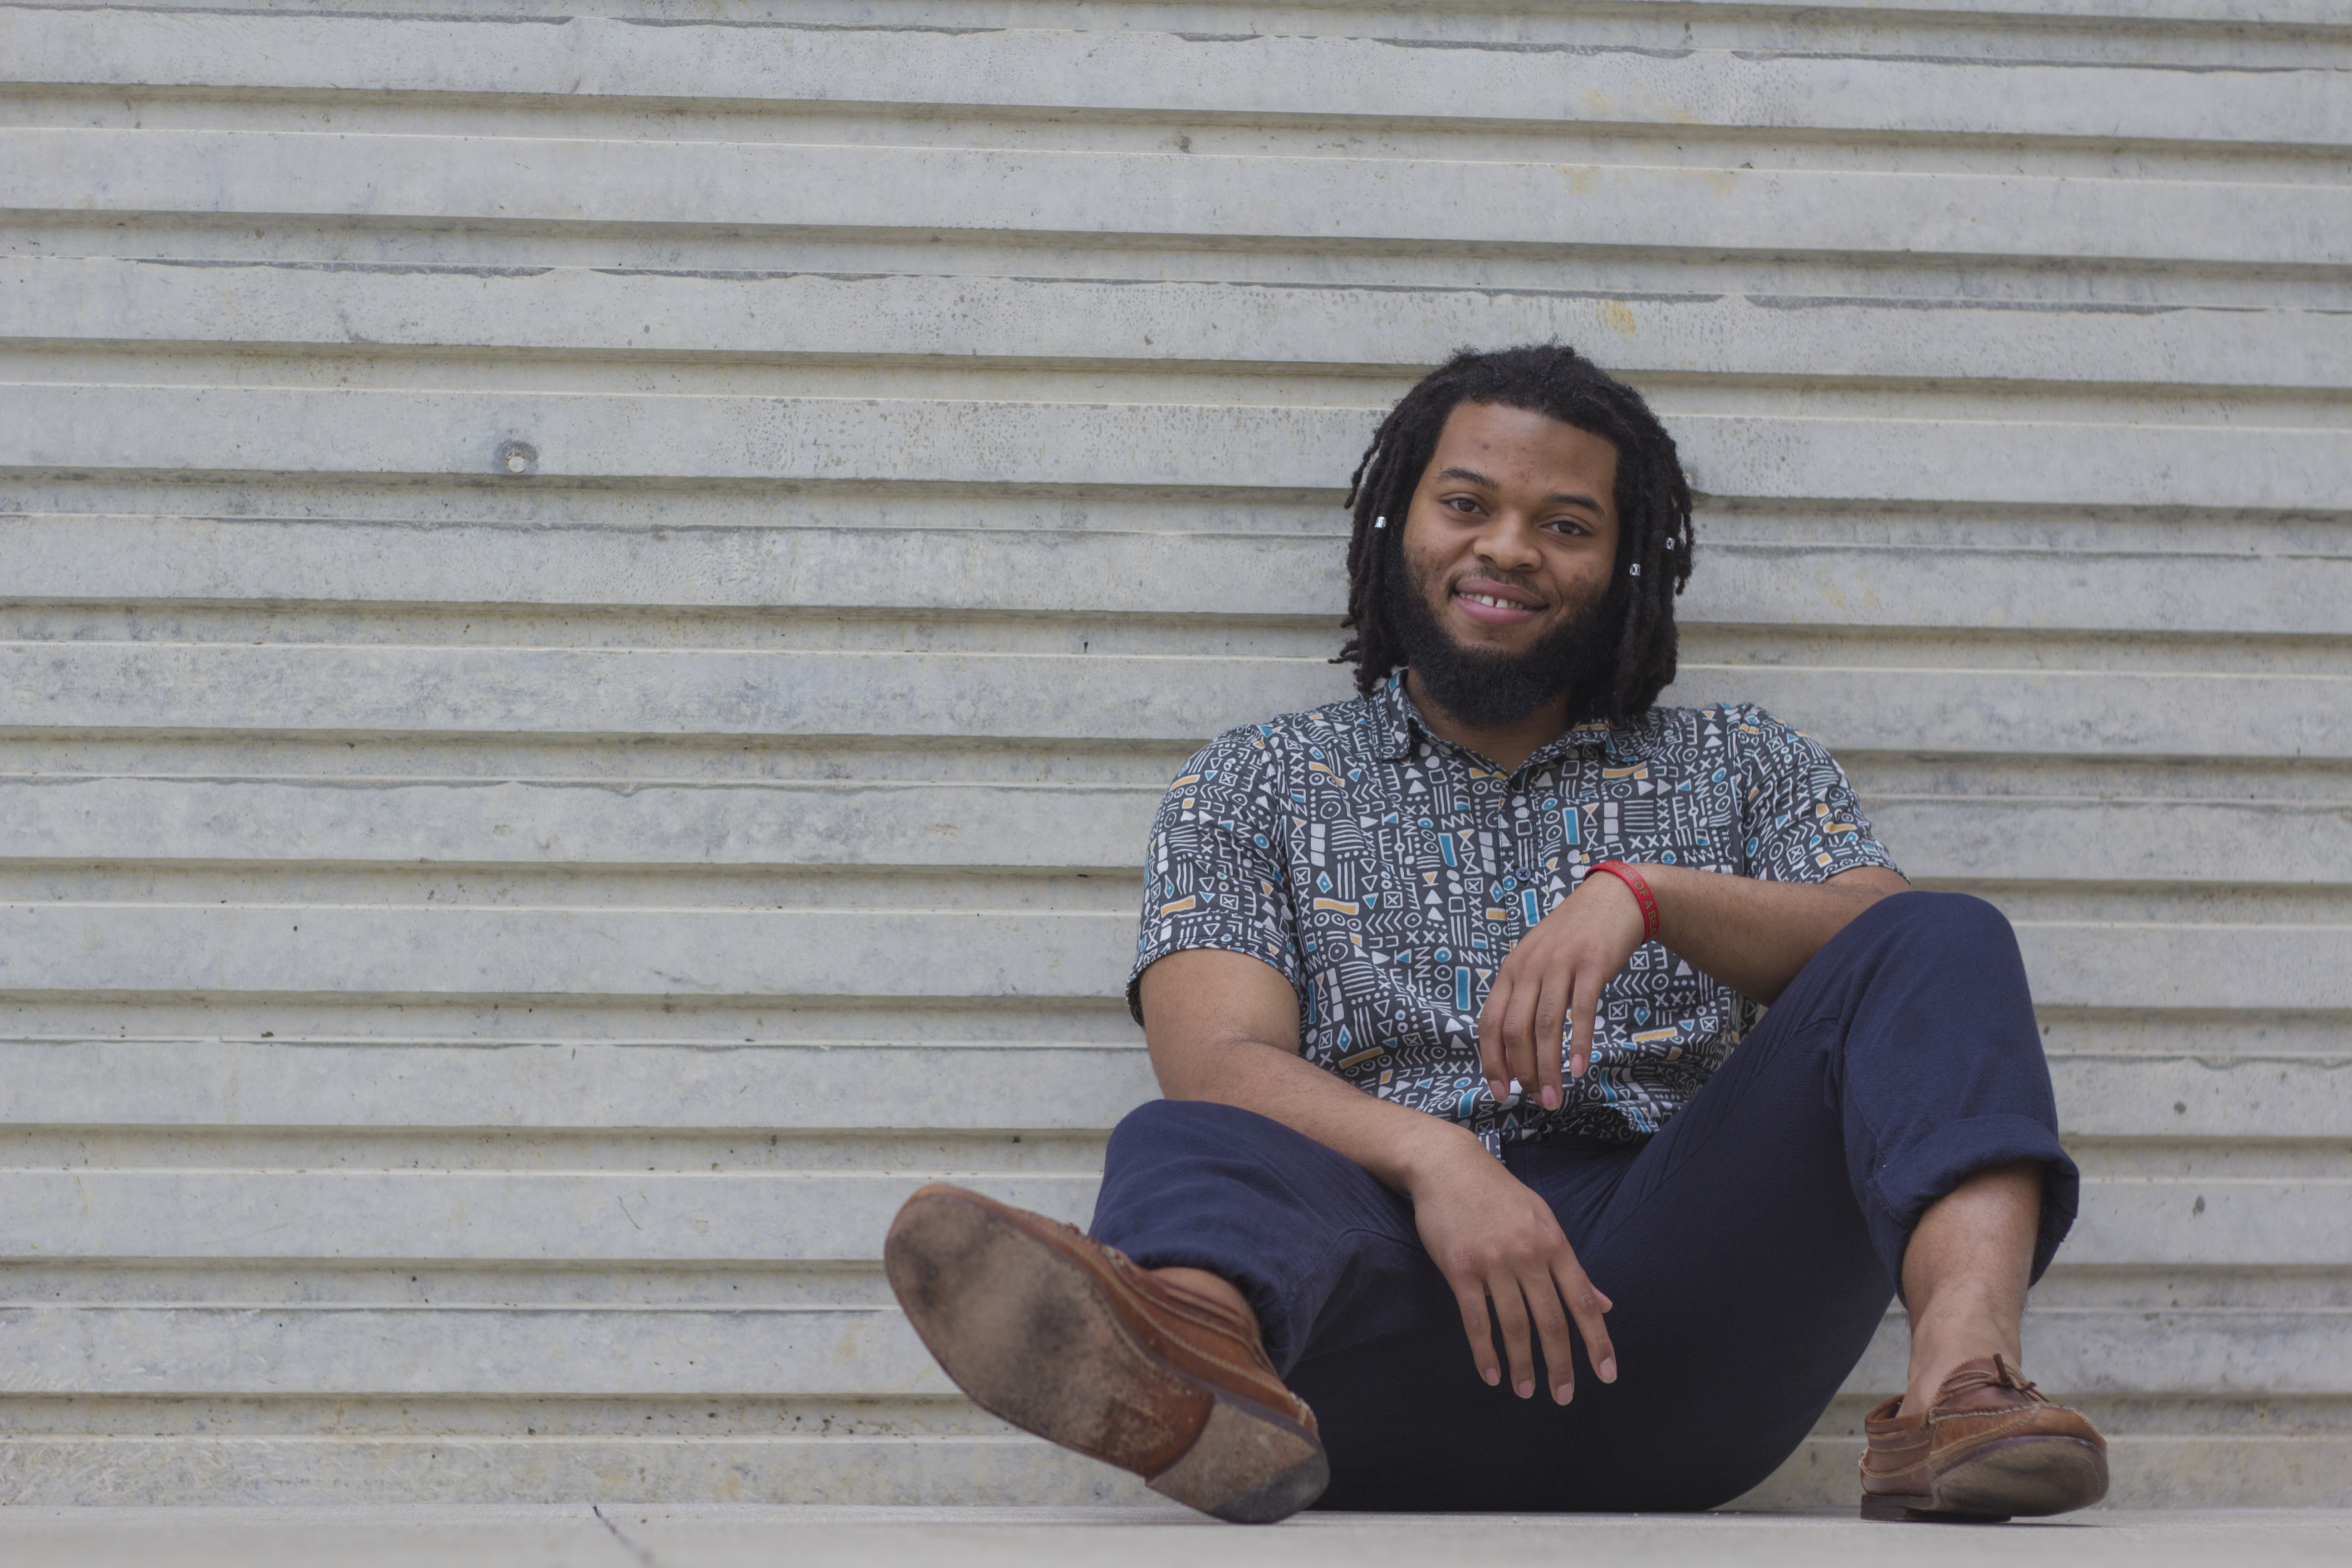 Corey Fisher studies communications at UMKC and love to debate